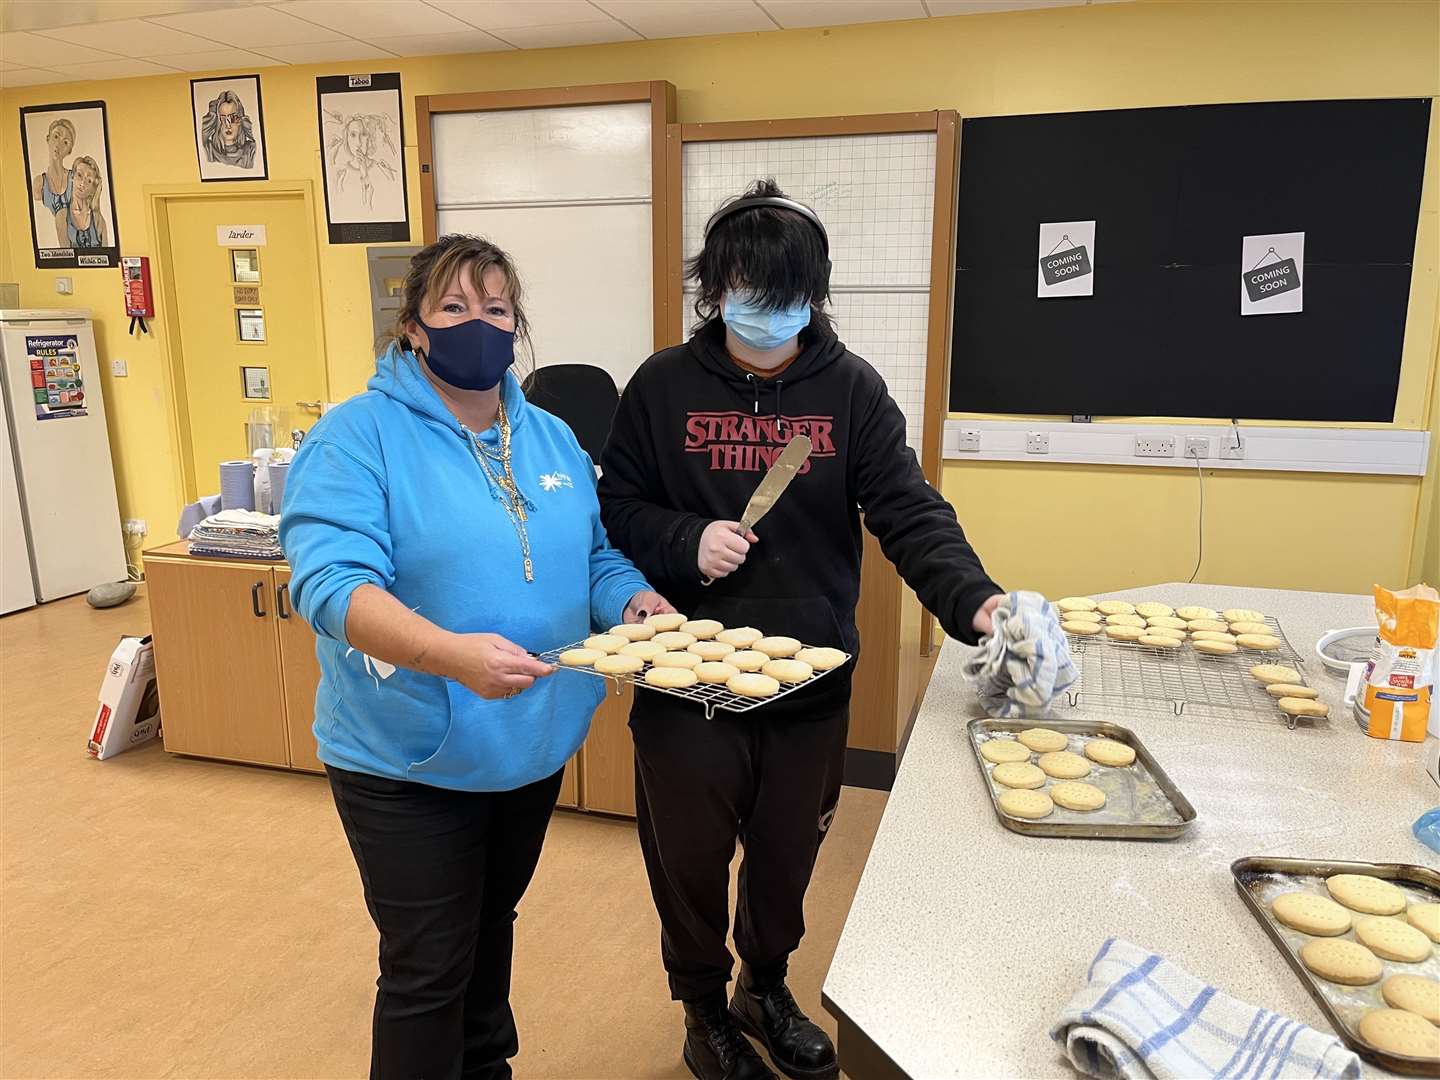 Baking in the photo below are Wanda Mackay, Highlife Highland Youth Development Office and Ethan Paterson.